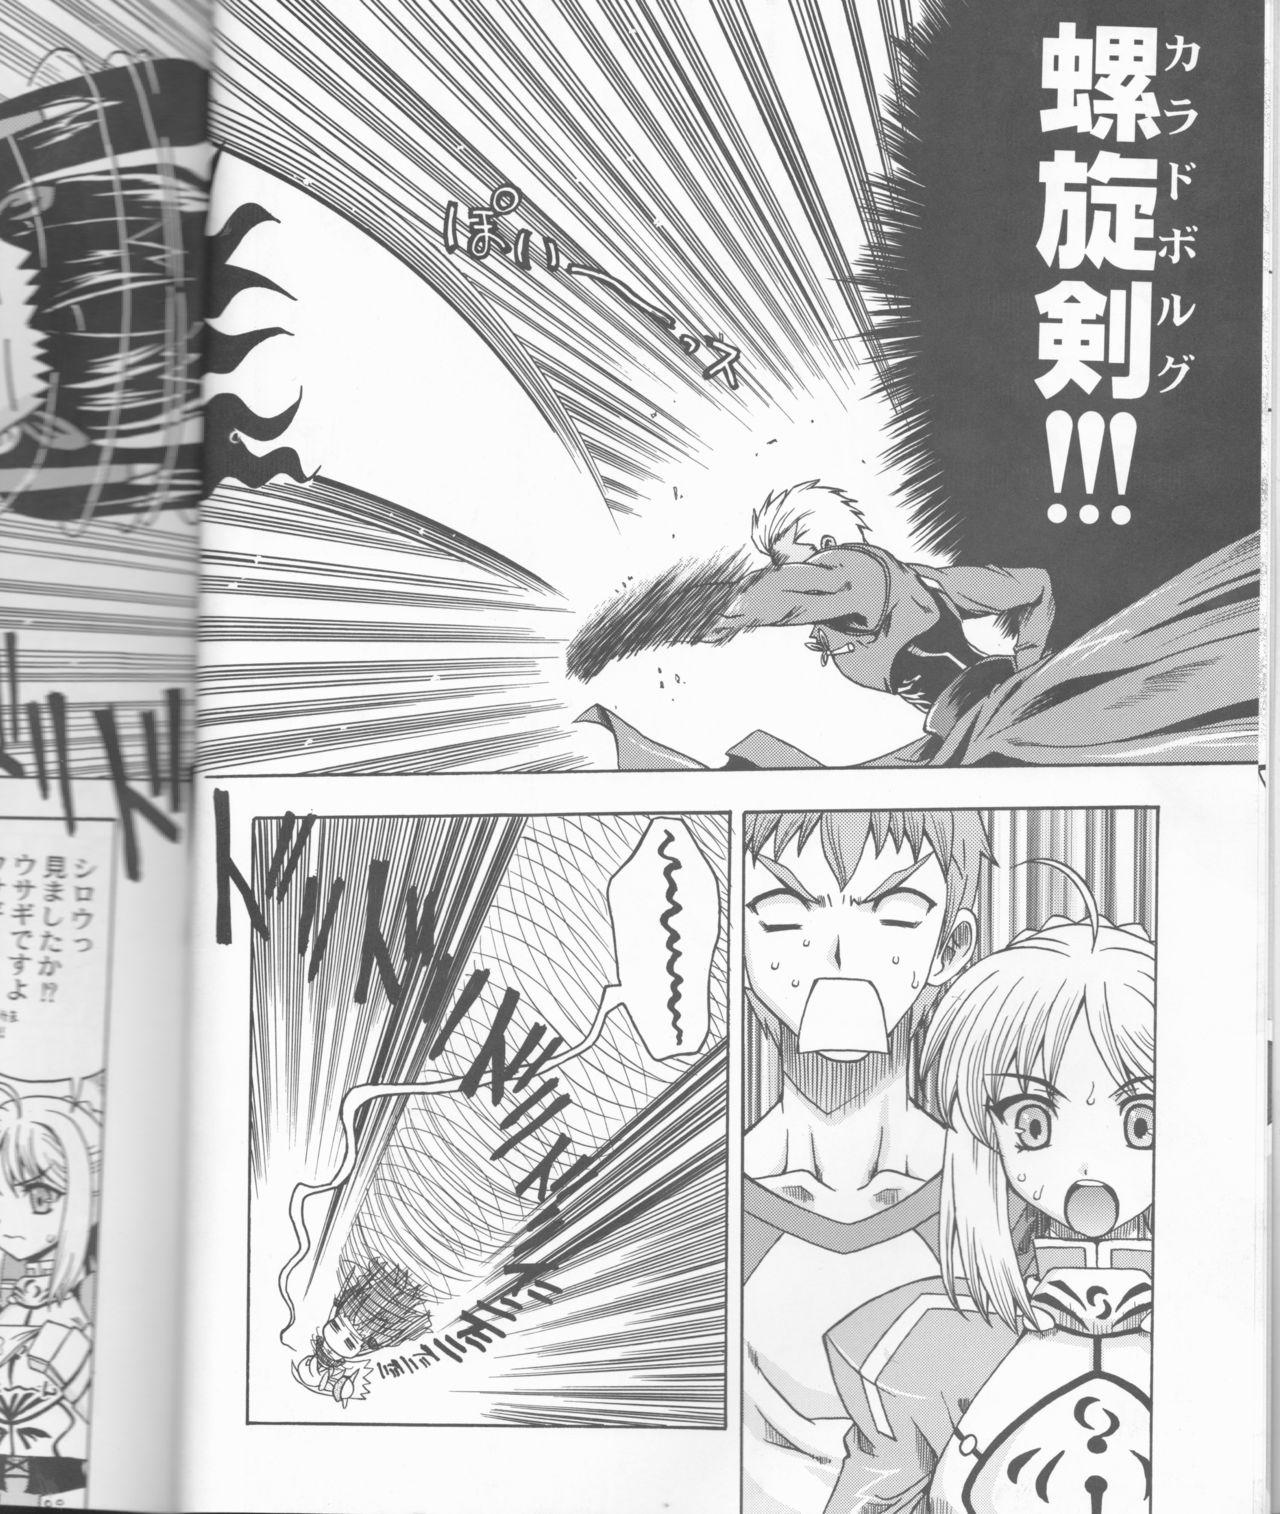 Sluts Going My Way - Fate stay night From - Page 9